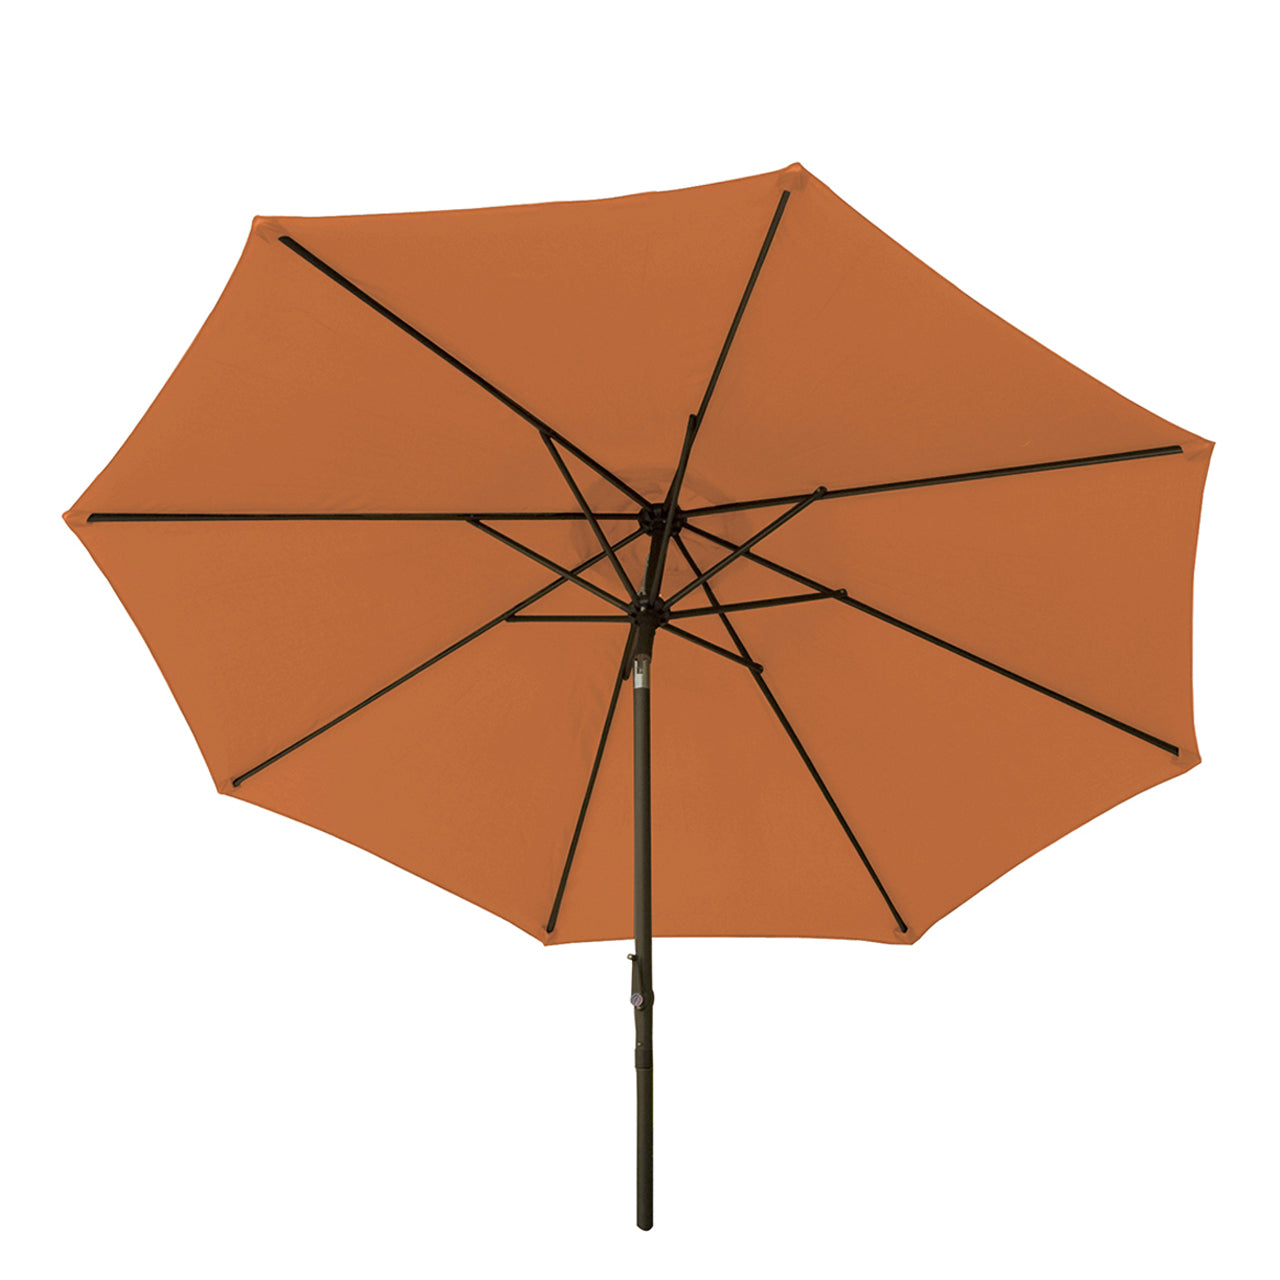 Bliss Outdoors 9-foot Patio Umbrella with Aluminum Pole in the terracotta variation.